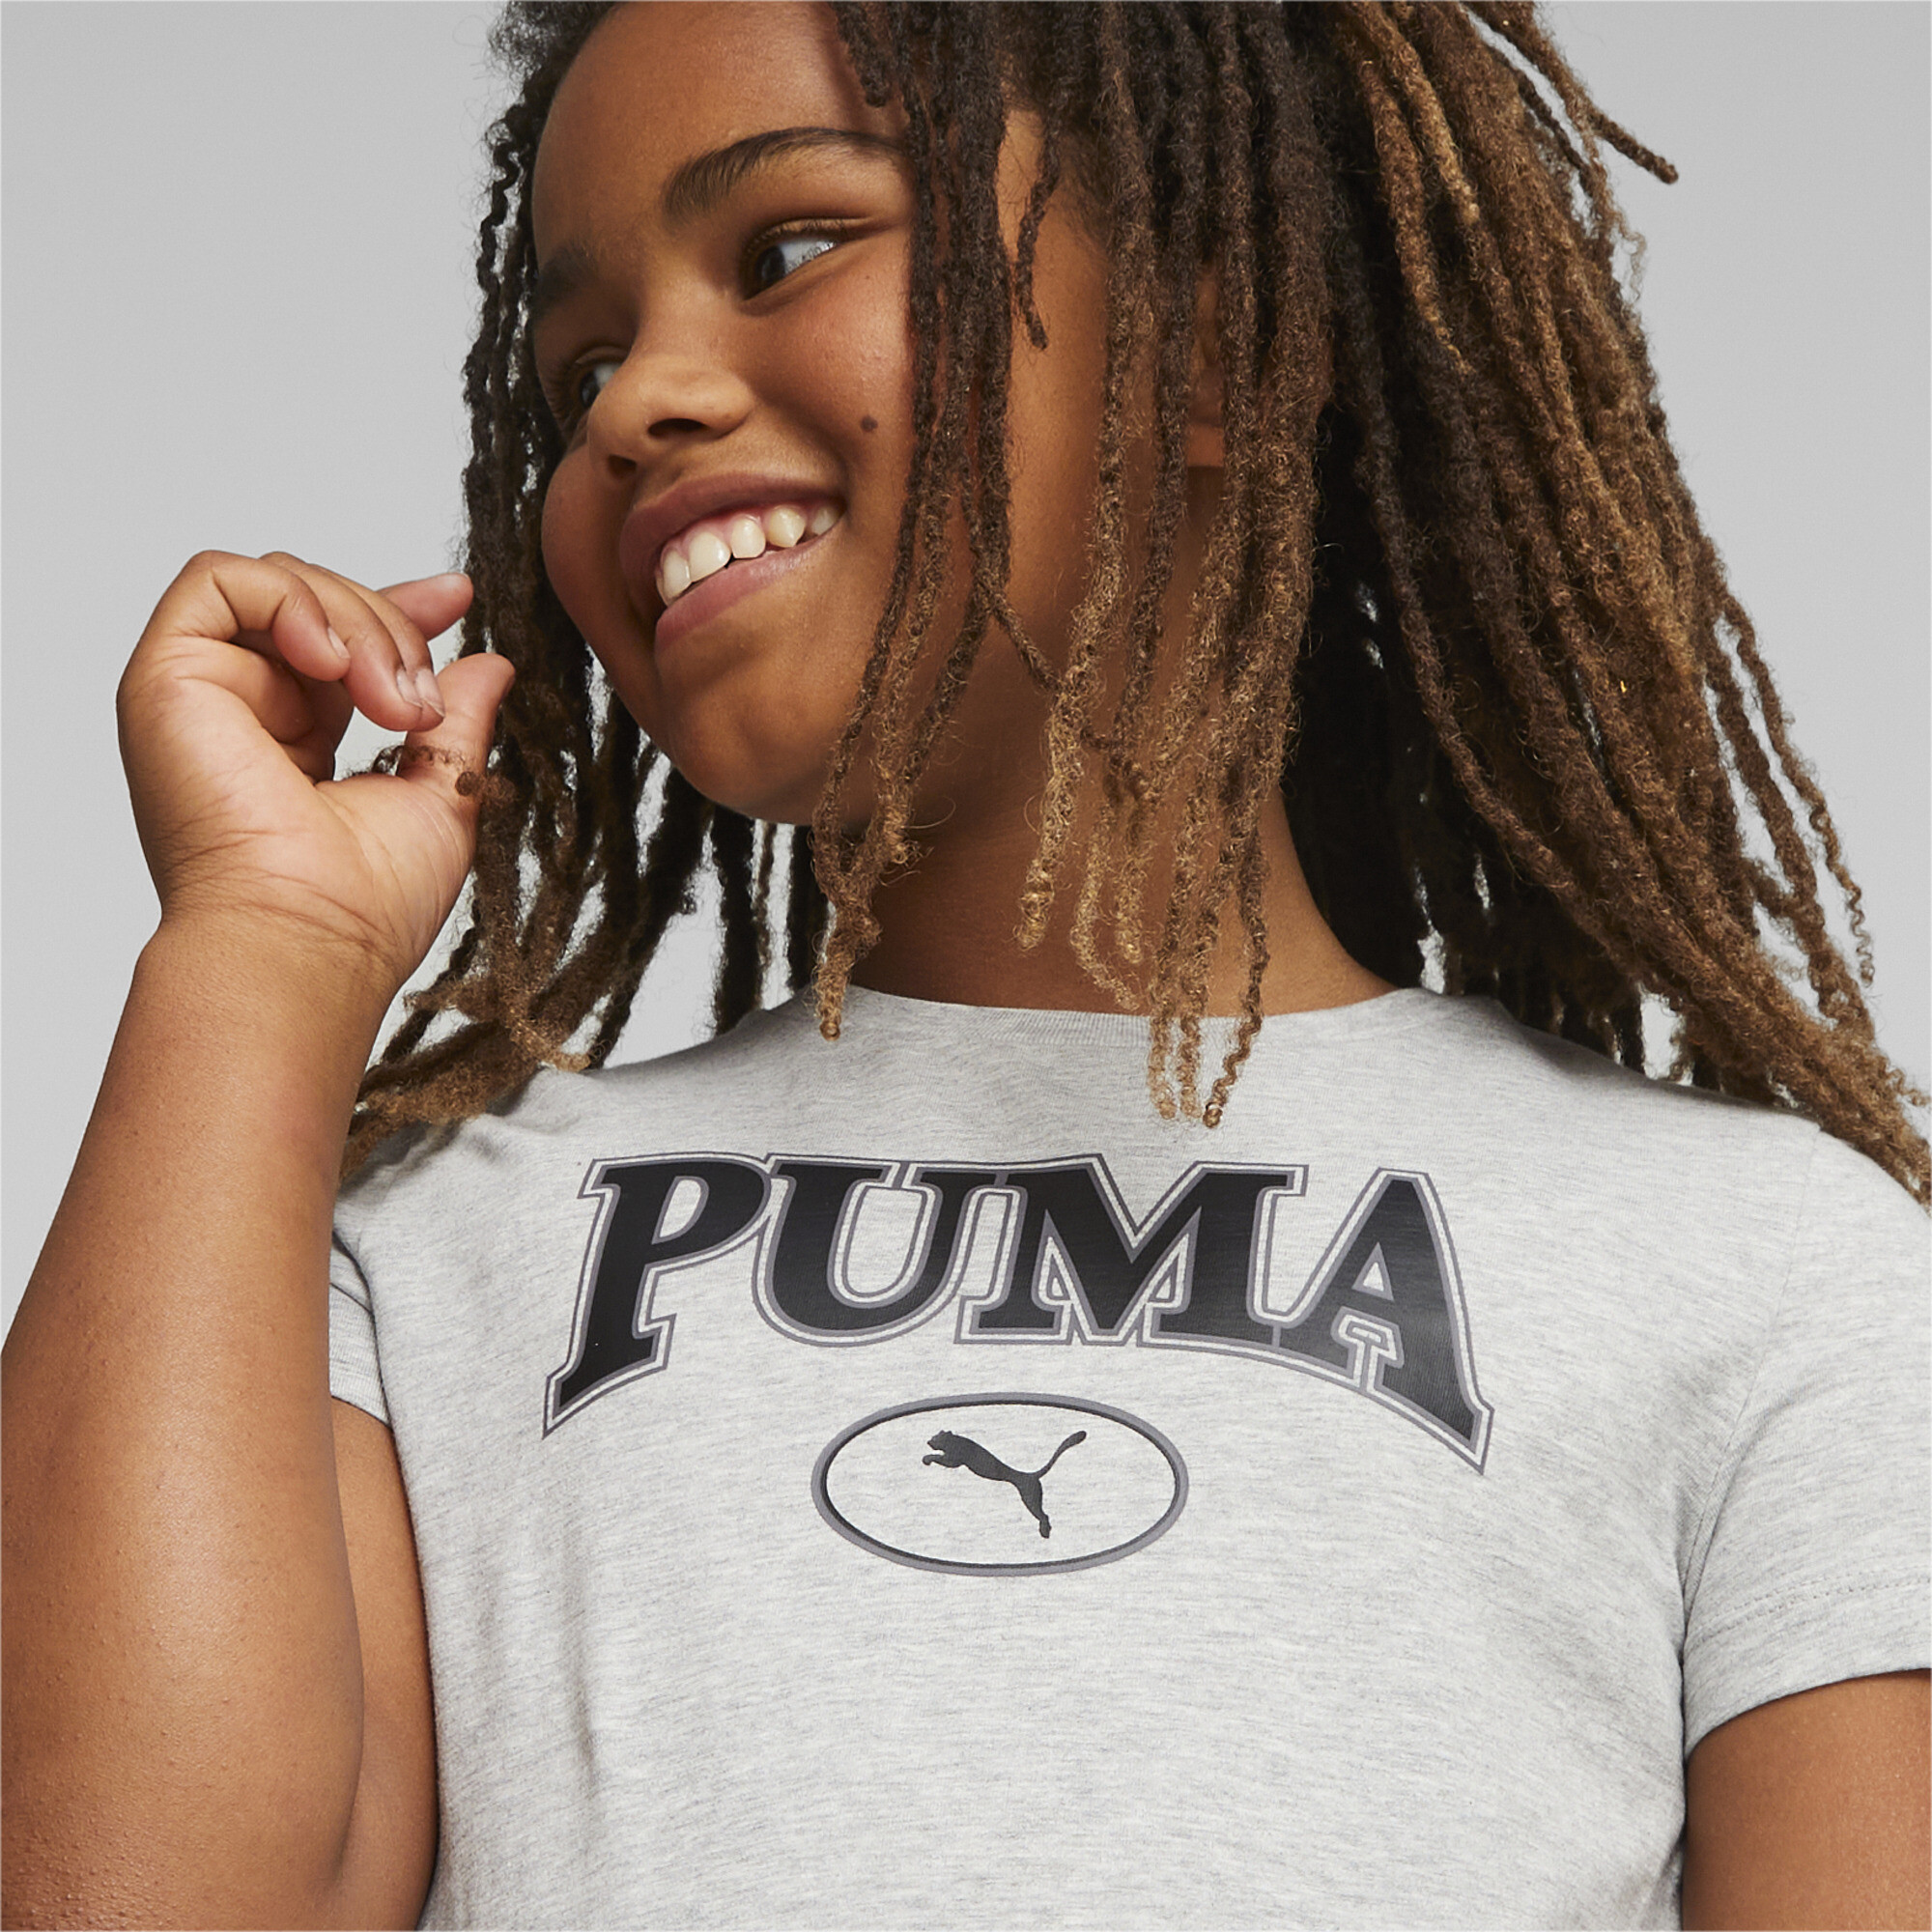 PUMA SQUAD Graphic T-Shirt In Heather, Size 7-8 Youth